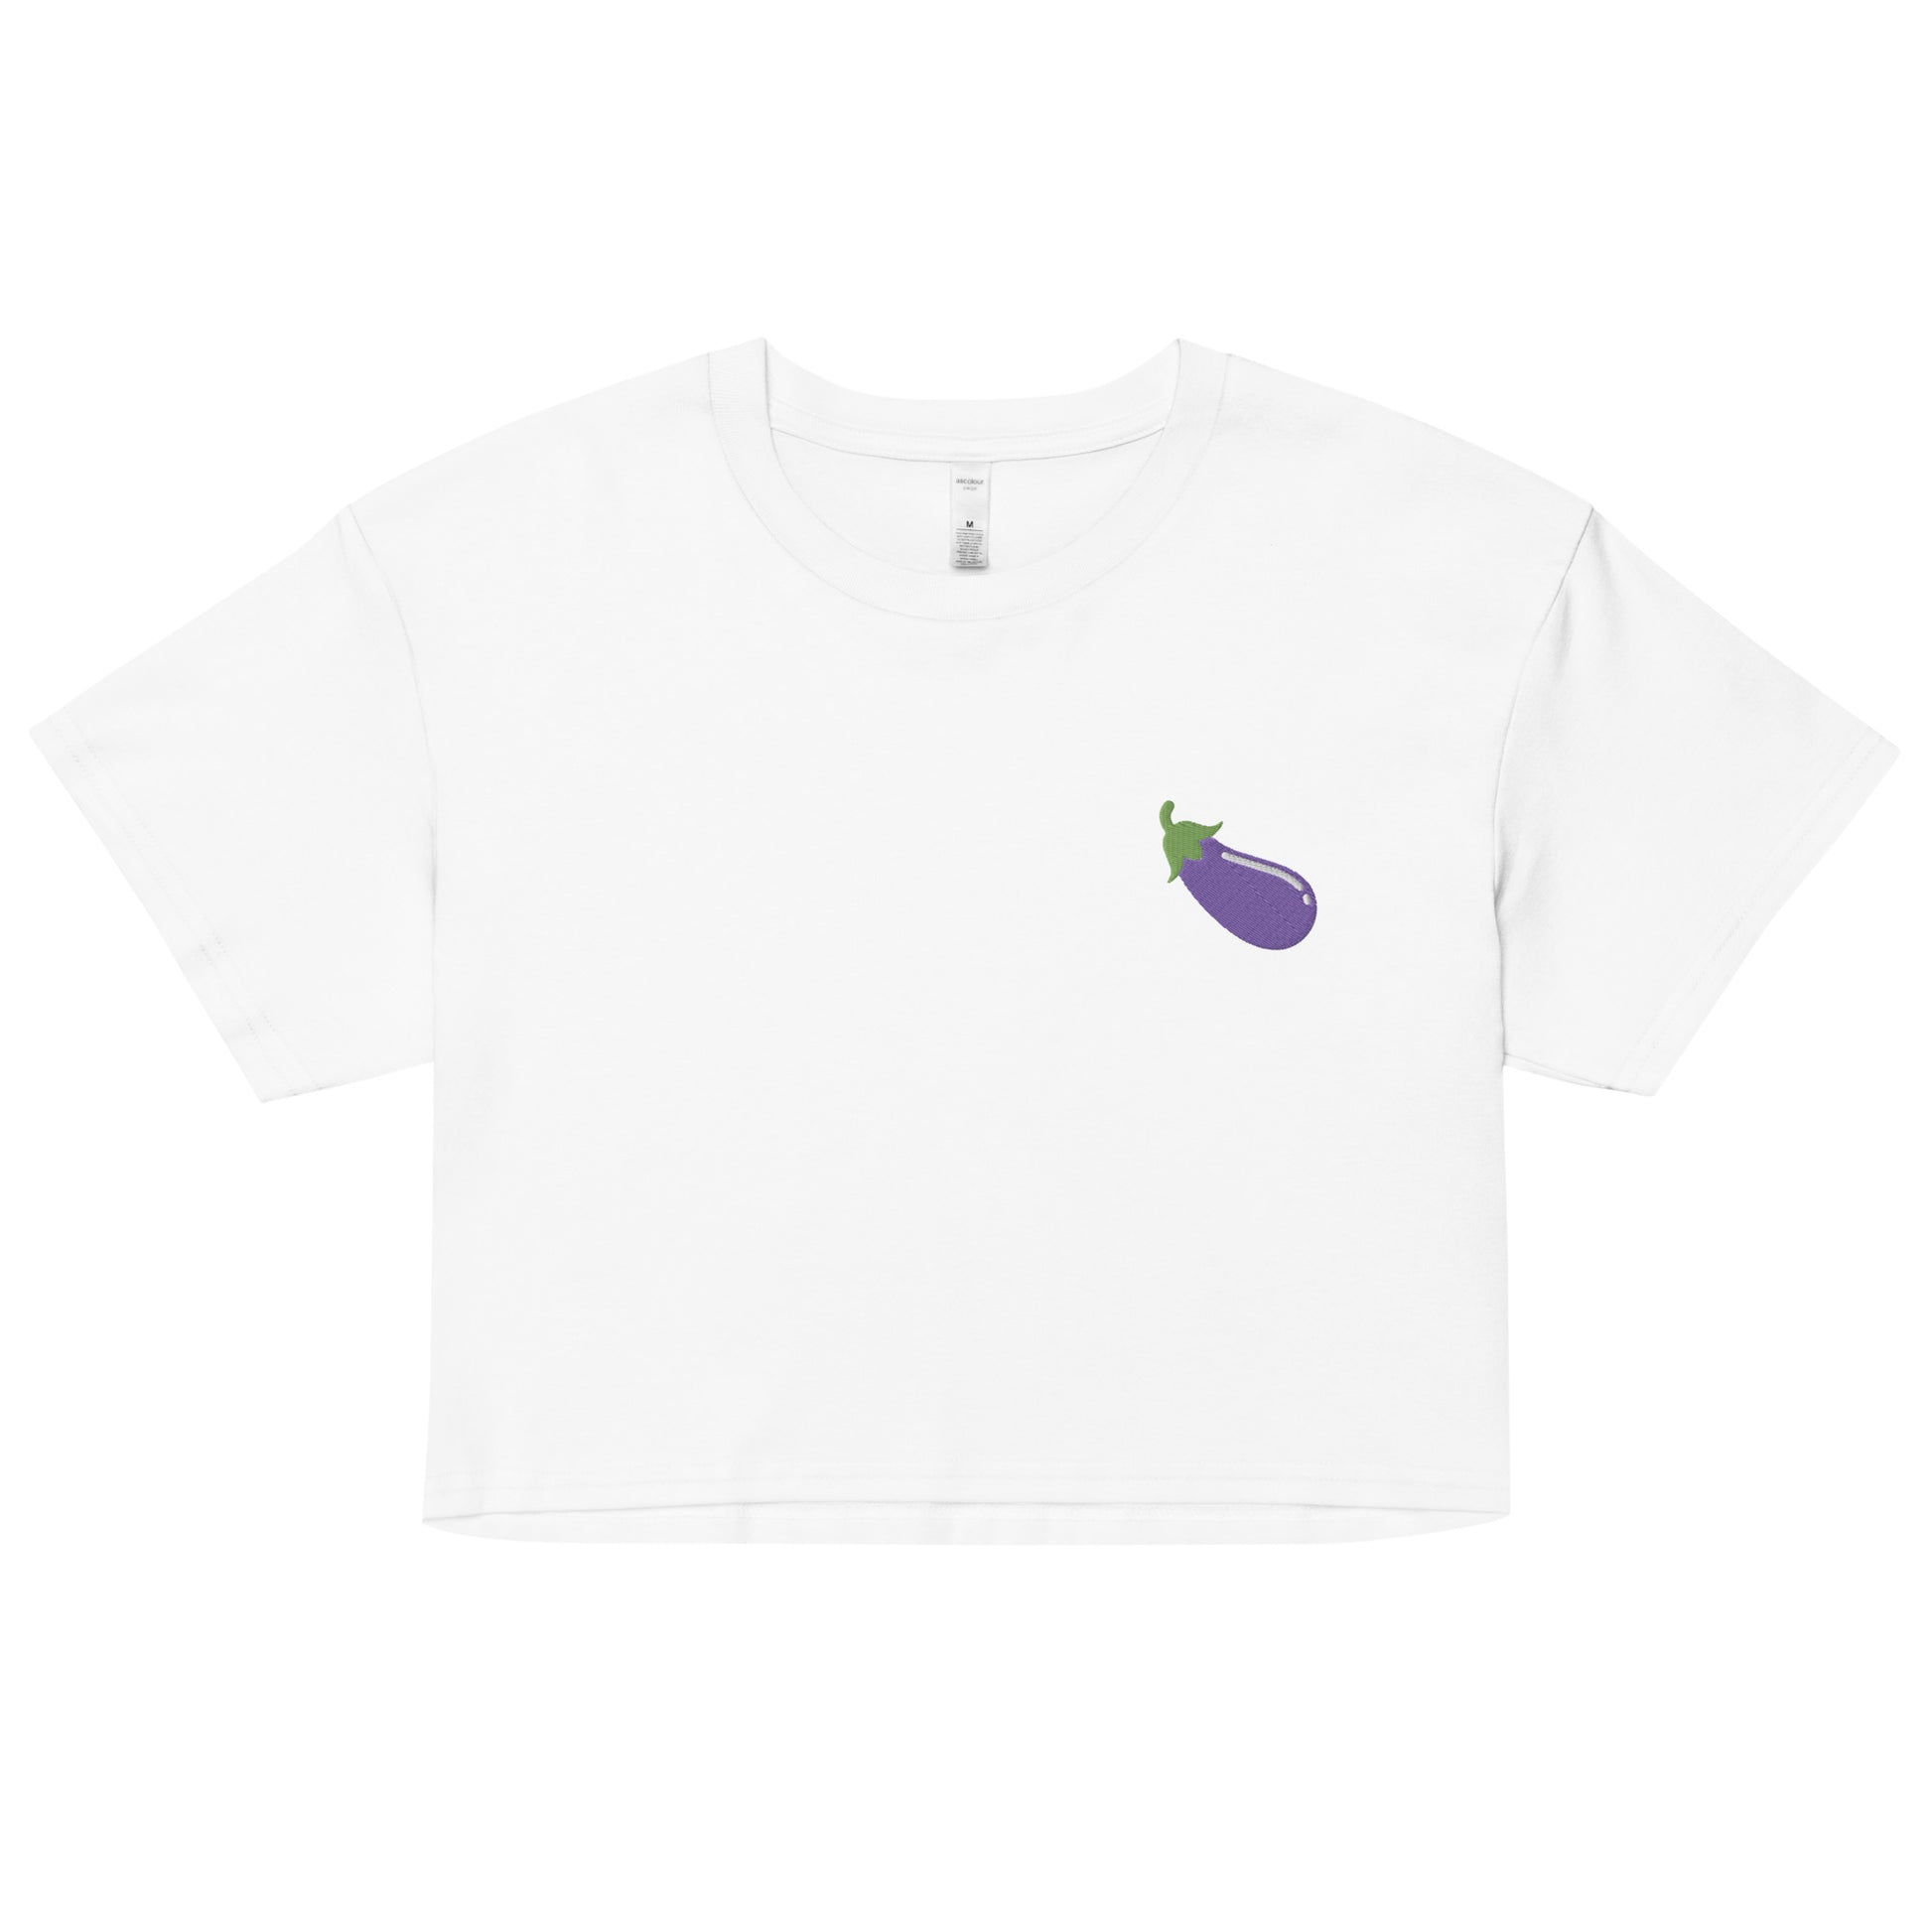 A relaxed white crop top features a modest crop and subtle eggplant embroidered design, adding a touch of mischief to your look—a playful celebration of gay culture! Made from 100% combed cotton. Available in Extra Small, Small, Medium, Large, Extra Large.